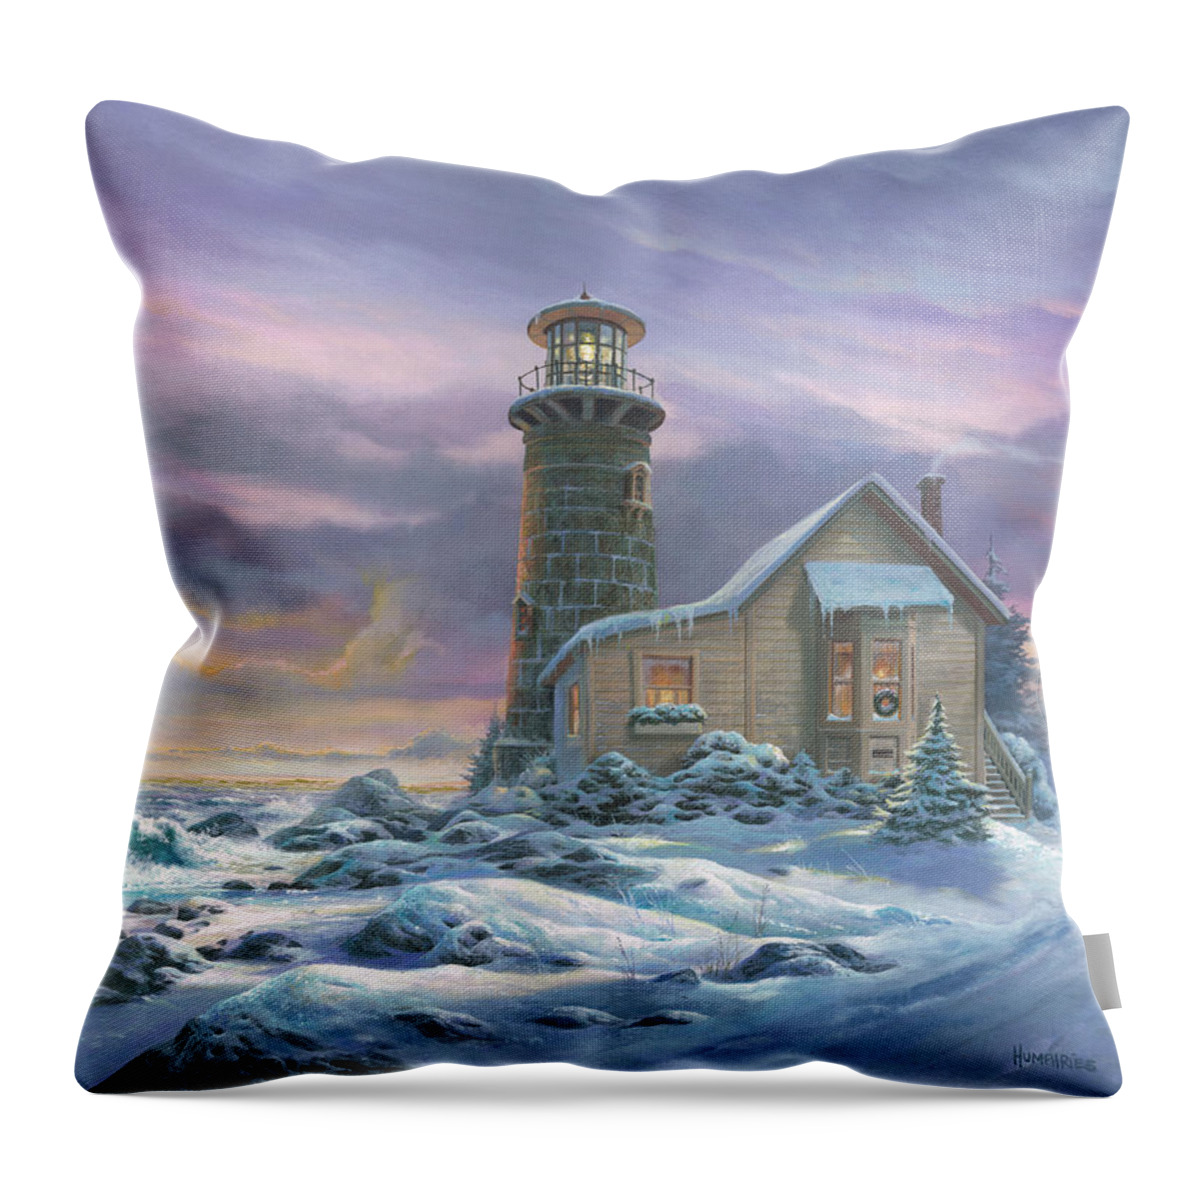 Michael Humphries Throw Pillow featuring the painting Snow Drifts by Michael Humphries